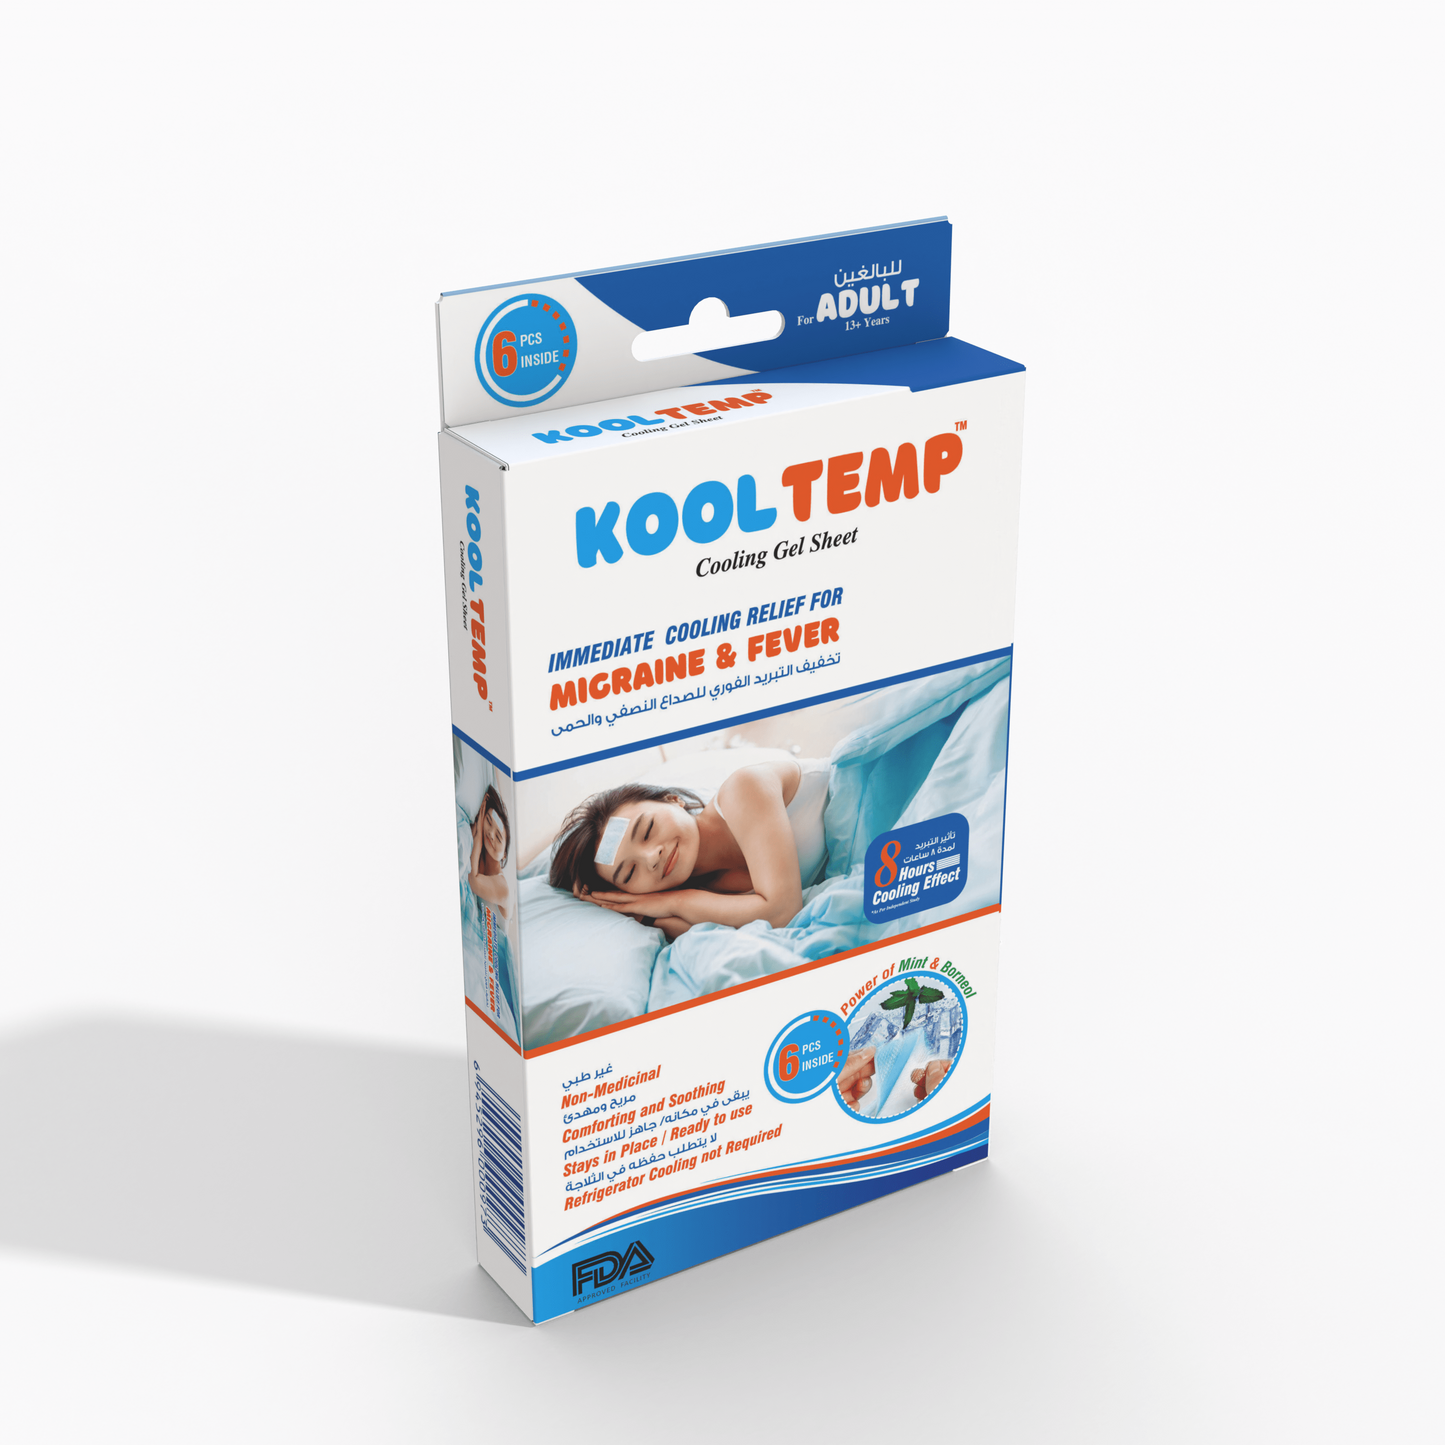 Kool Temp for Adults - Six cooling patches for Migraine and fever